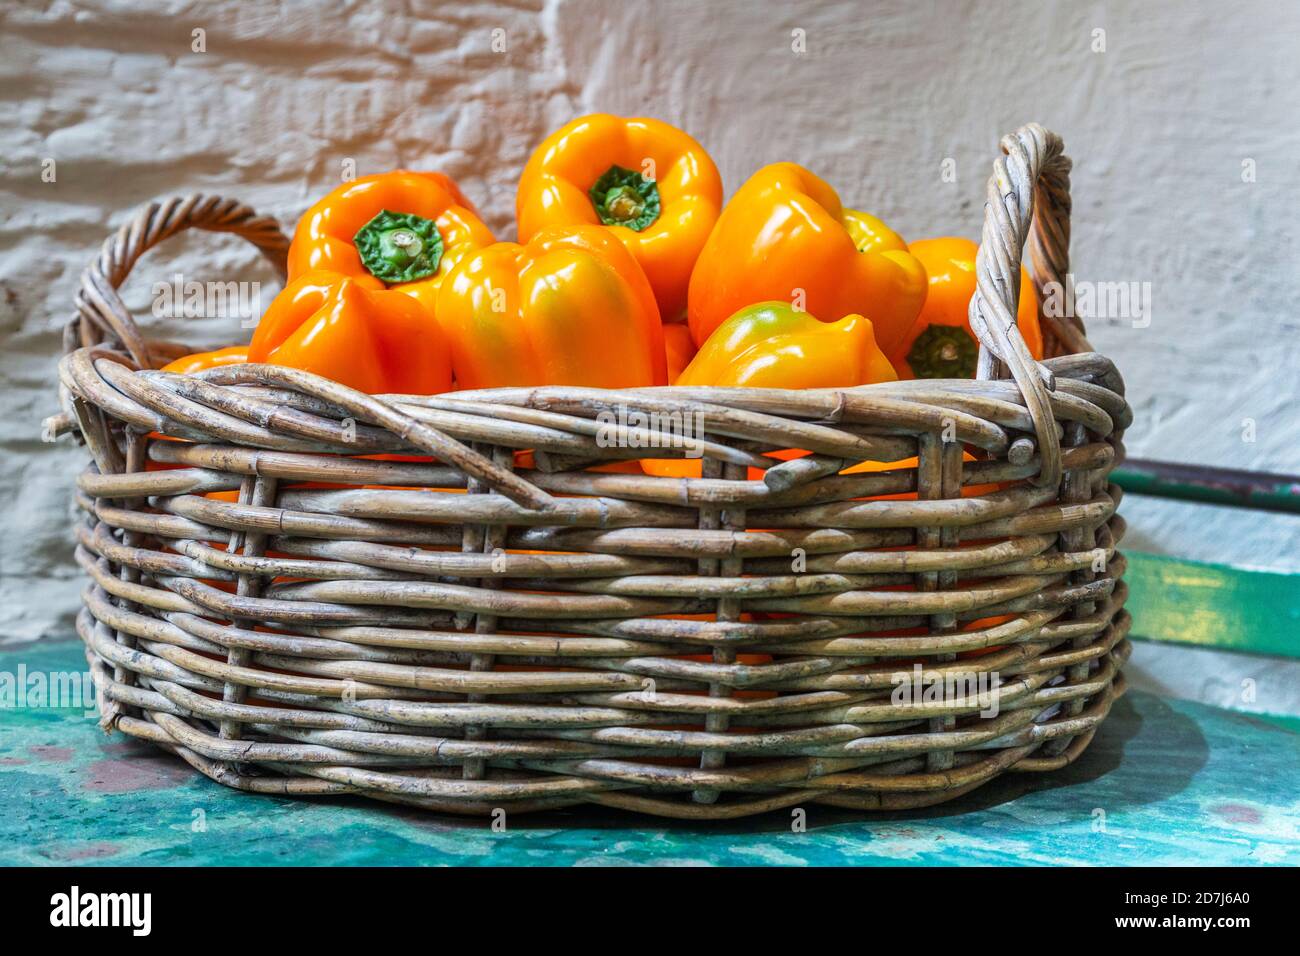 Orange bell peppers in a basket on a painted table Stock Photo